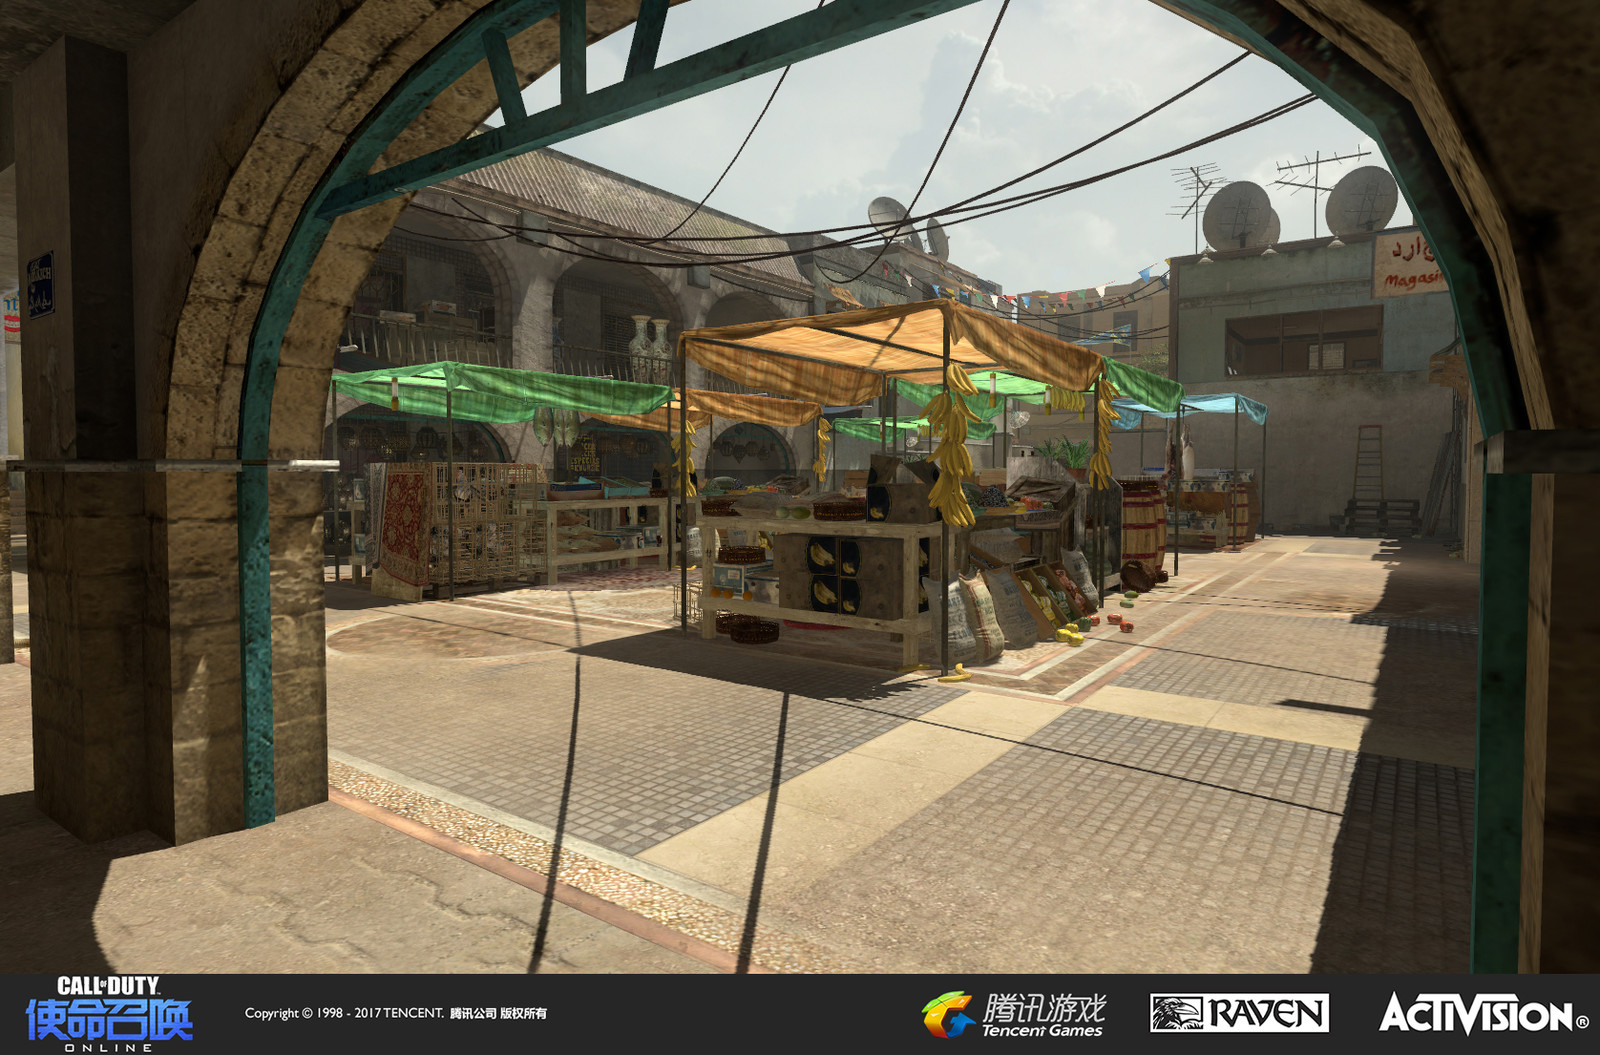 Seatown: A re-imagined multiplayer map originally appearing in Modern Warfare 3. I created the terrain and set dress in this market area (with exception to the market stall cloth tops). 